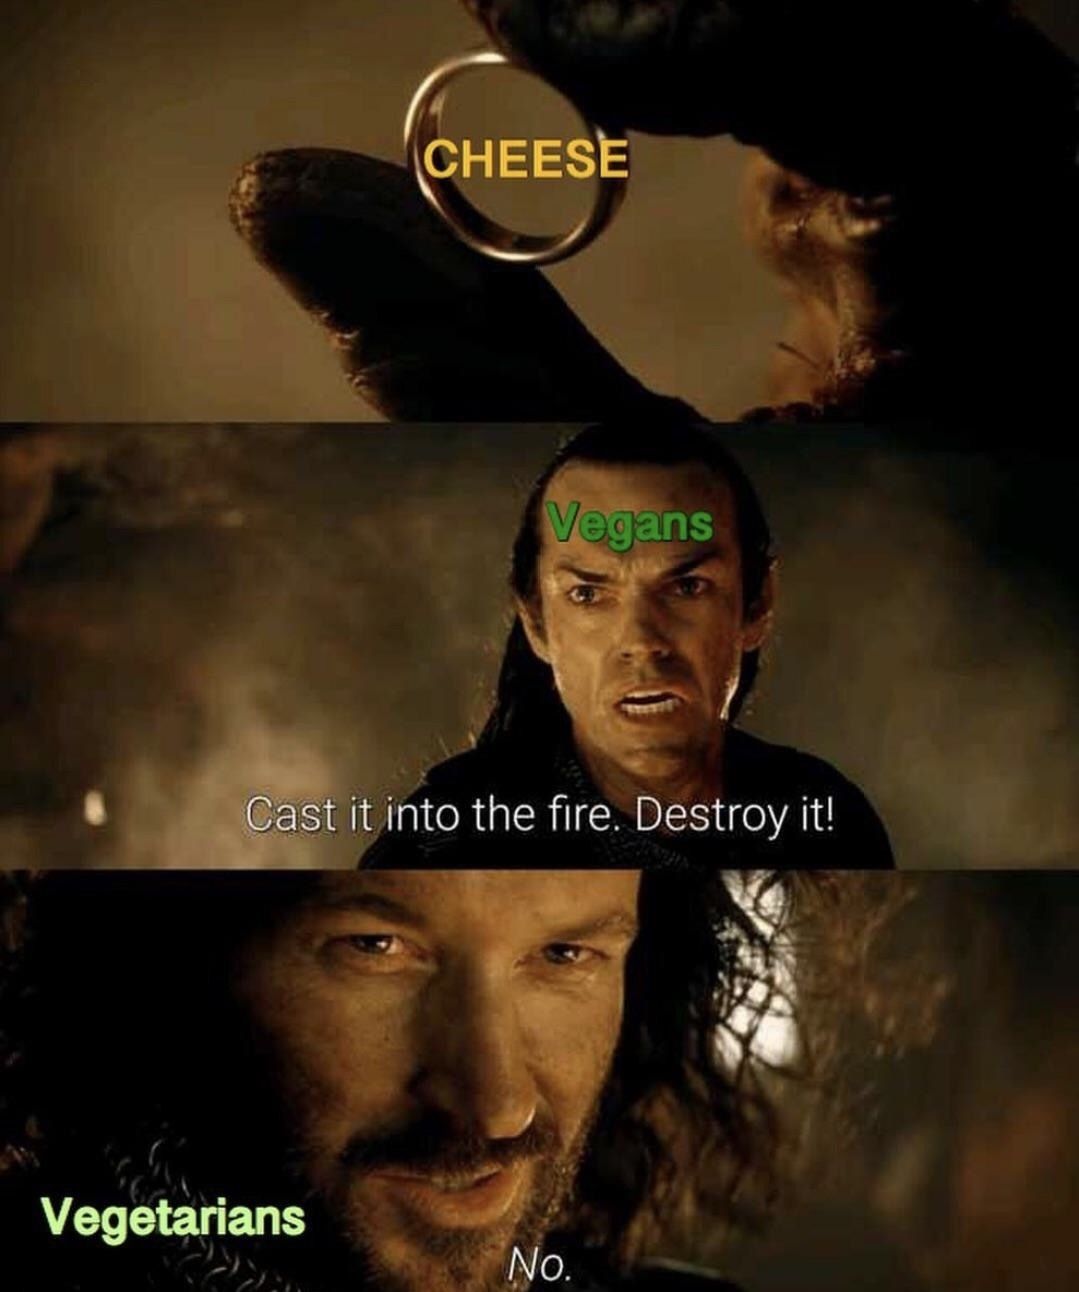 One cheese to rule them all